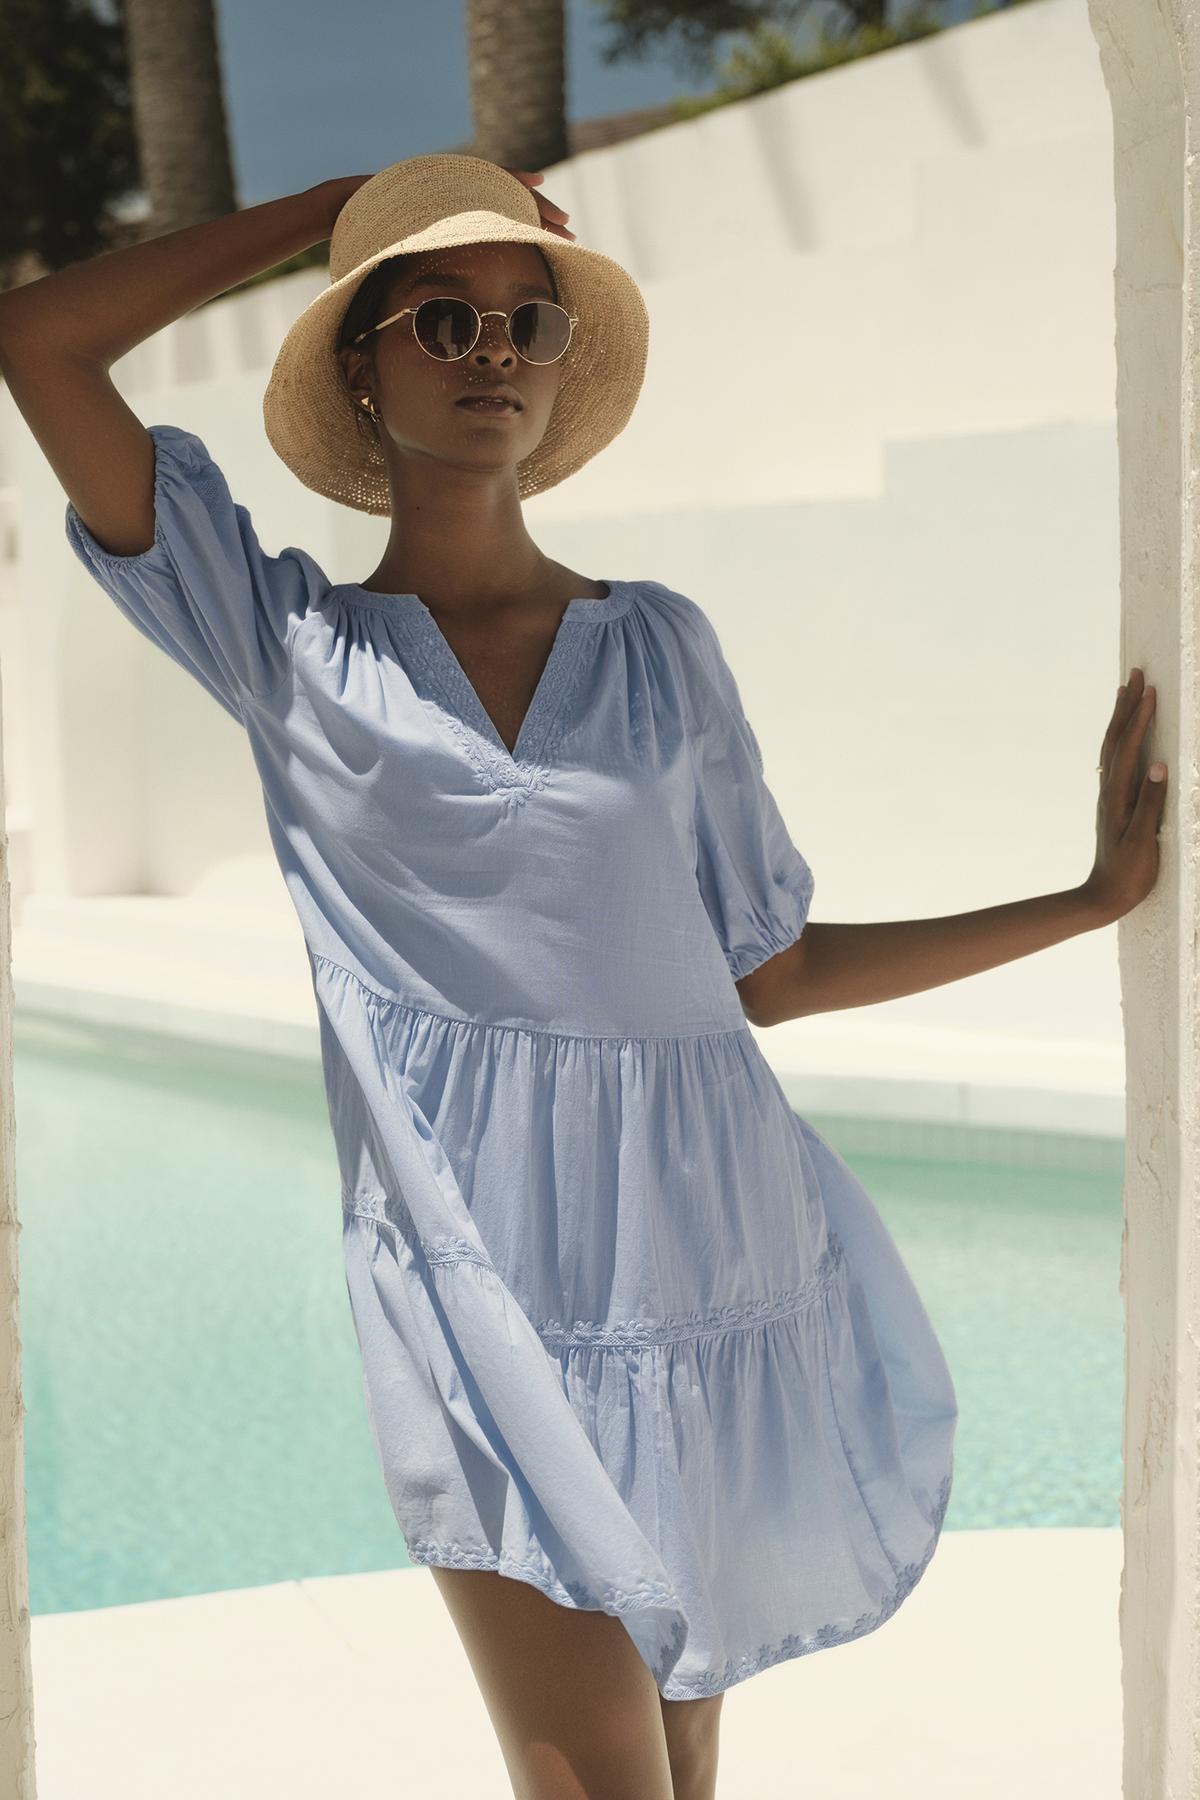   A woman in a CHRISSY EMBROIDERED BOHO DRESS by Velvet by Graham & Spencer and straw hat posing by a pool, with a white wall and palm trees in the background. 